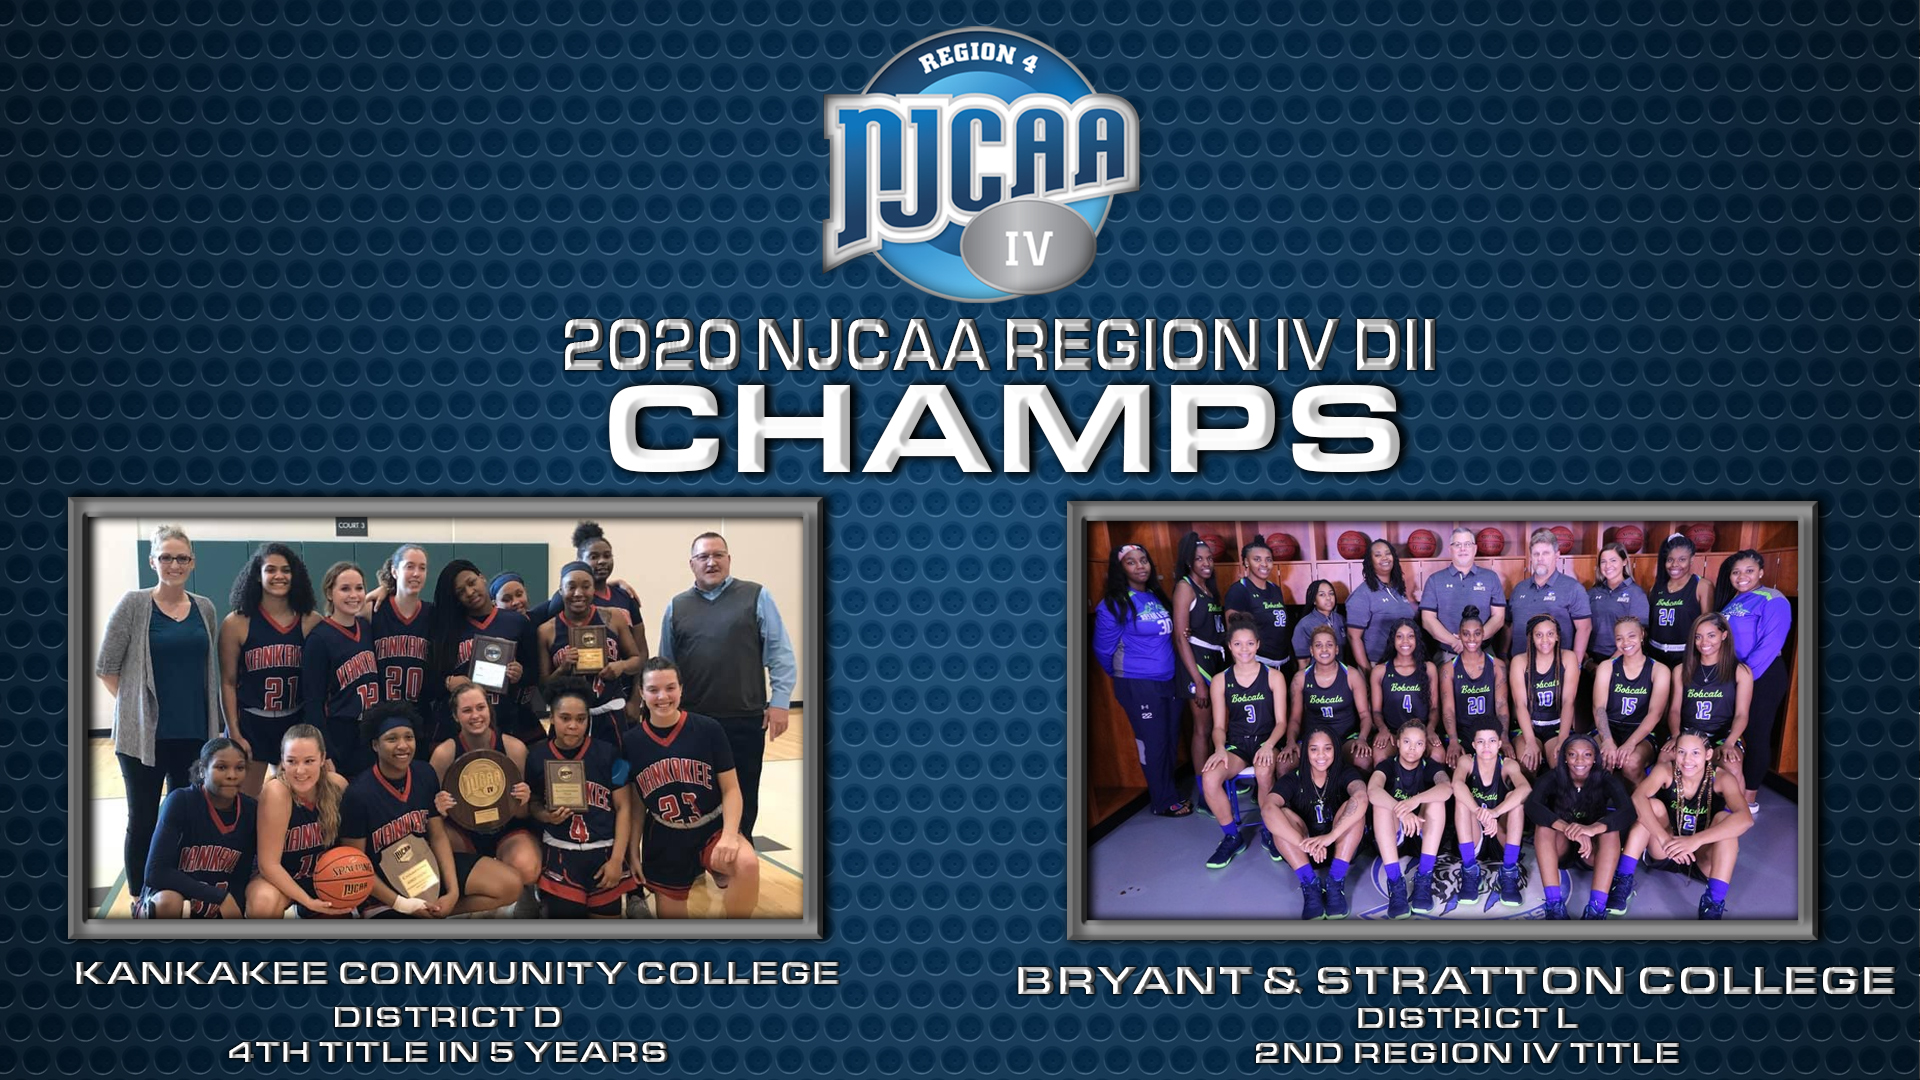 (Images courtesy of Kankakee Community College Athletics and Bryant & Stratton College Athletics)